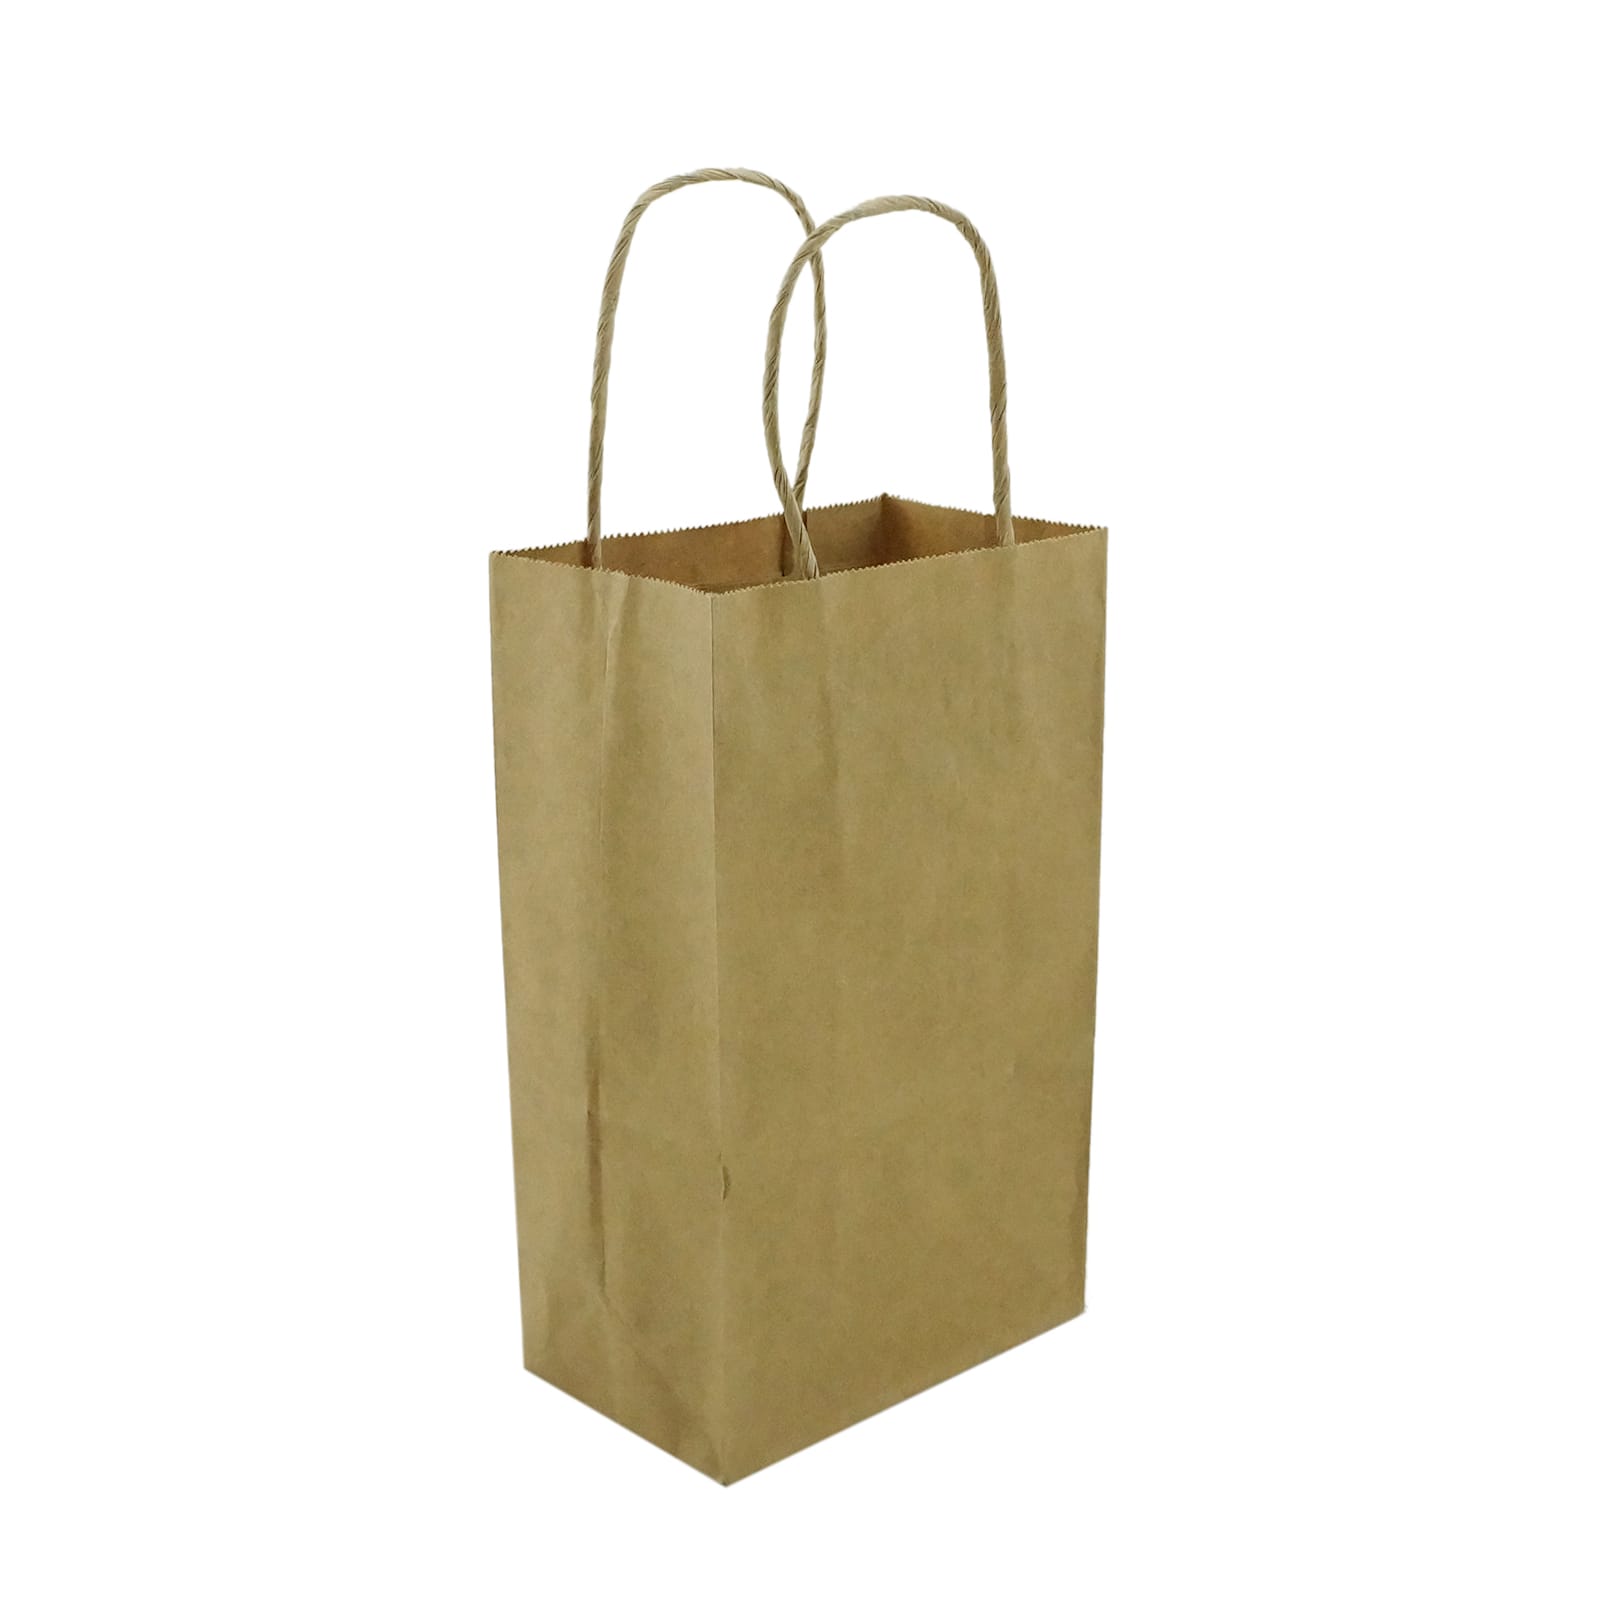 Find the Small Kraft Paper Bag by Celebrate It™ at Michaels